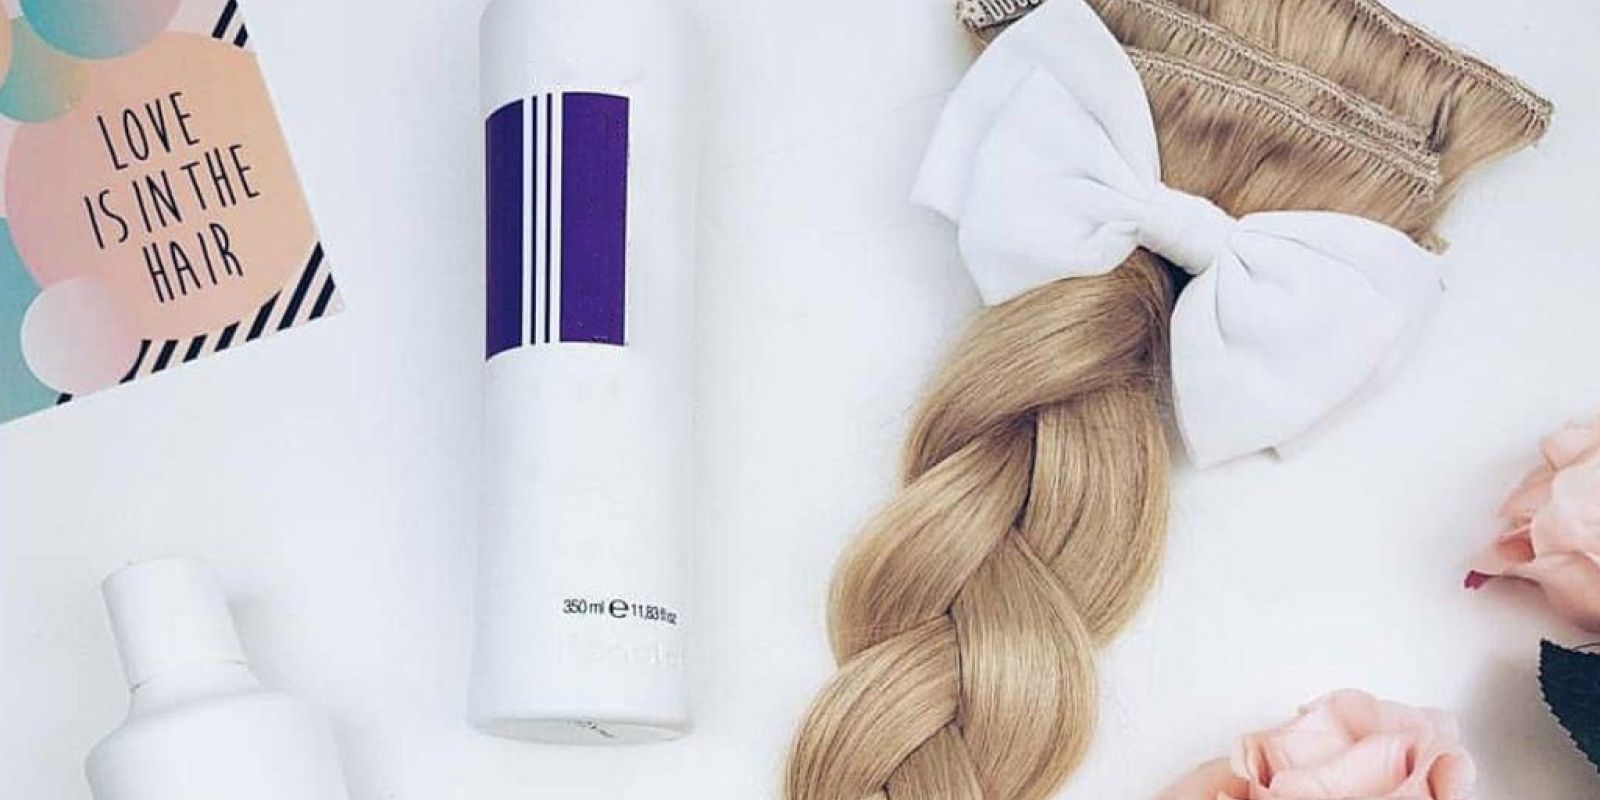 20 Best Blonde Hair Care Shampoos & Conditioners admin ajax.php?action=kernel&p=image&src=%7B%22file%22%3A%22wp content%2Fuploads%2F2021%2F06%2Fpurcorganics blonde hair